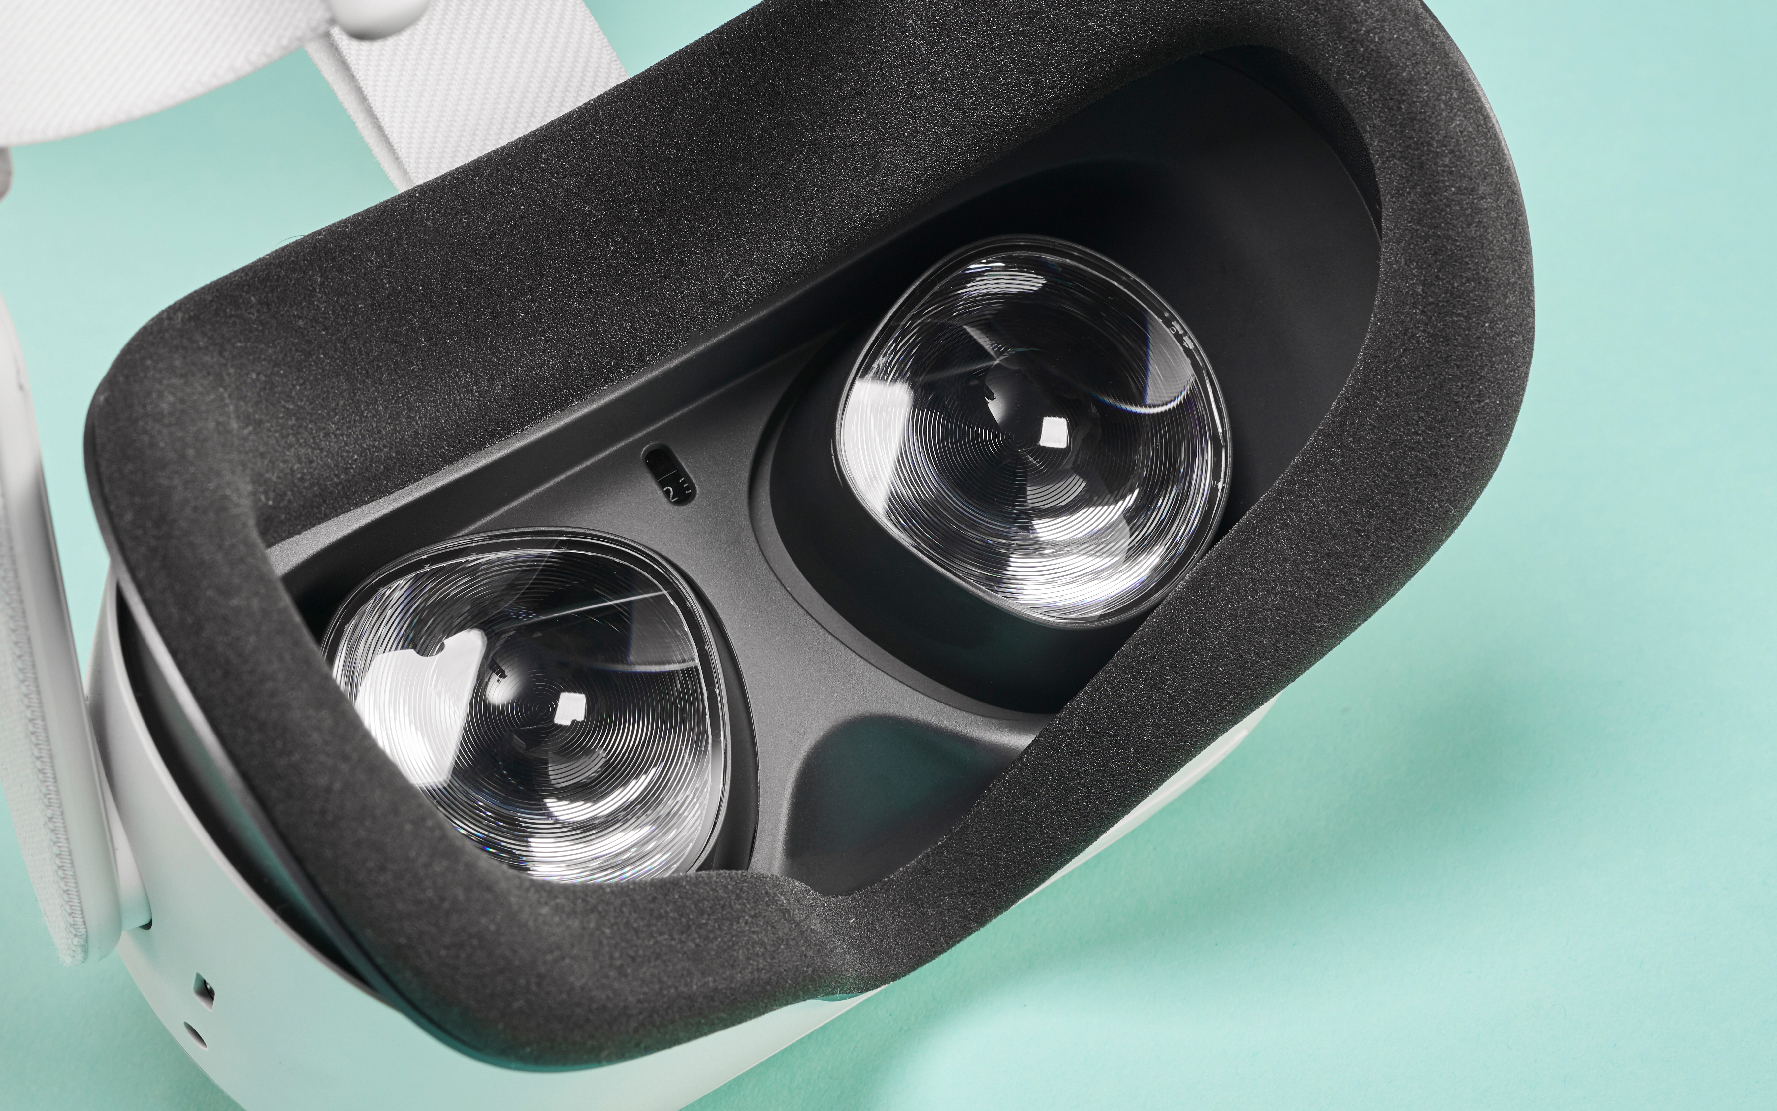  Facebook is down, and it's affecting Oculus headsets 